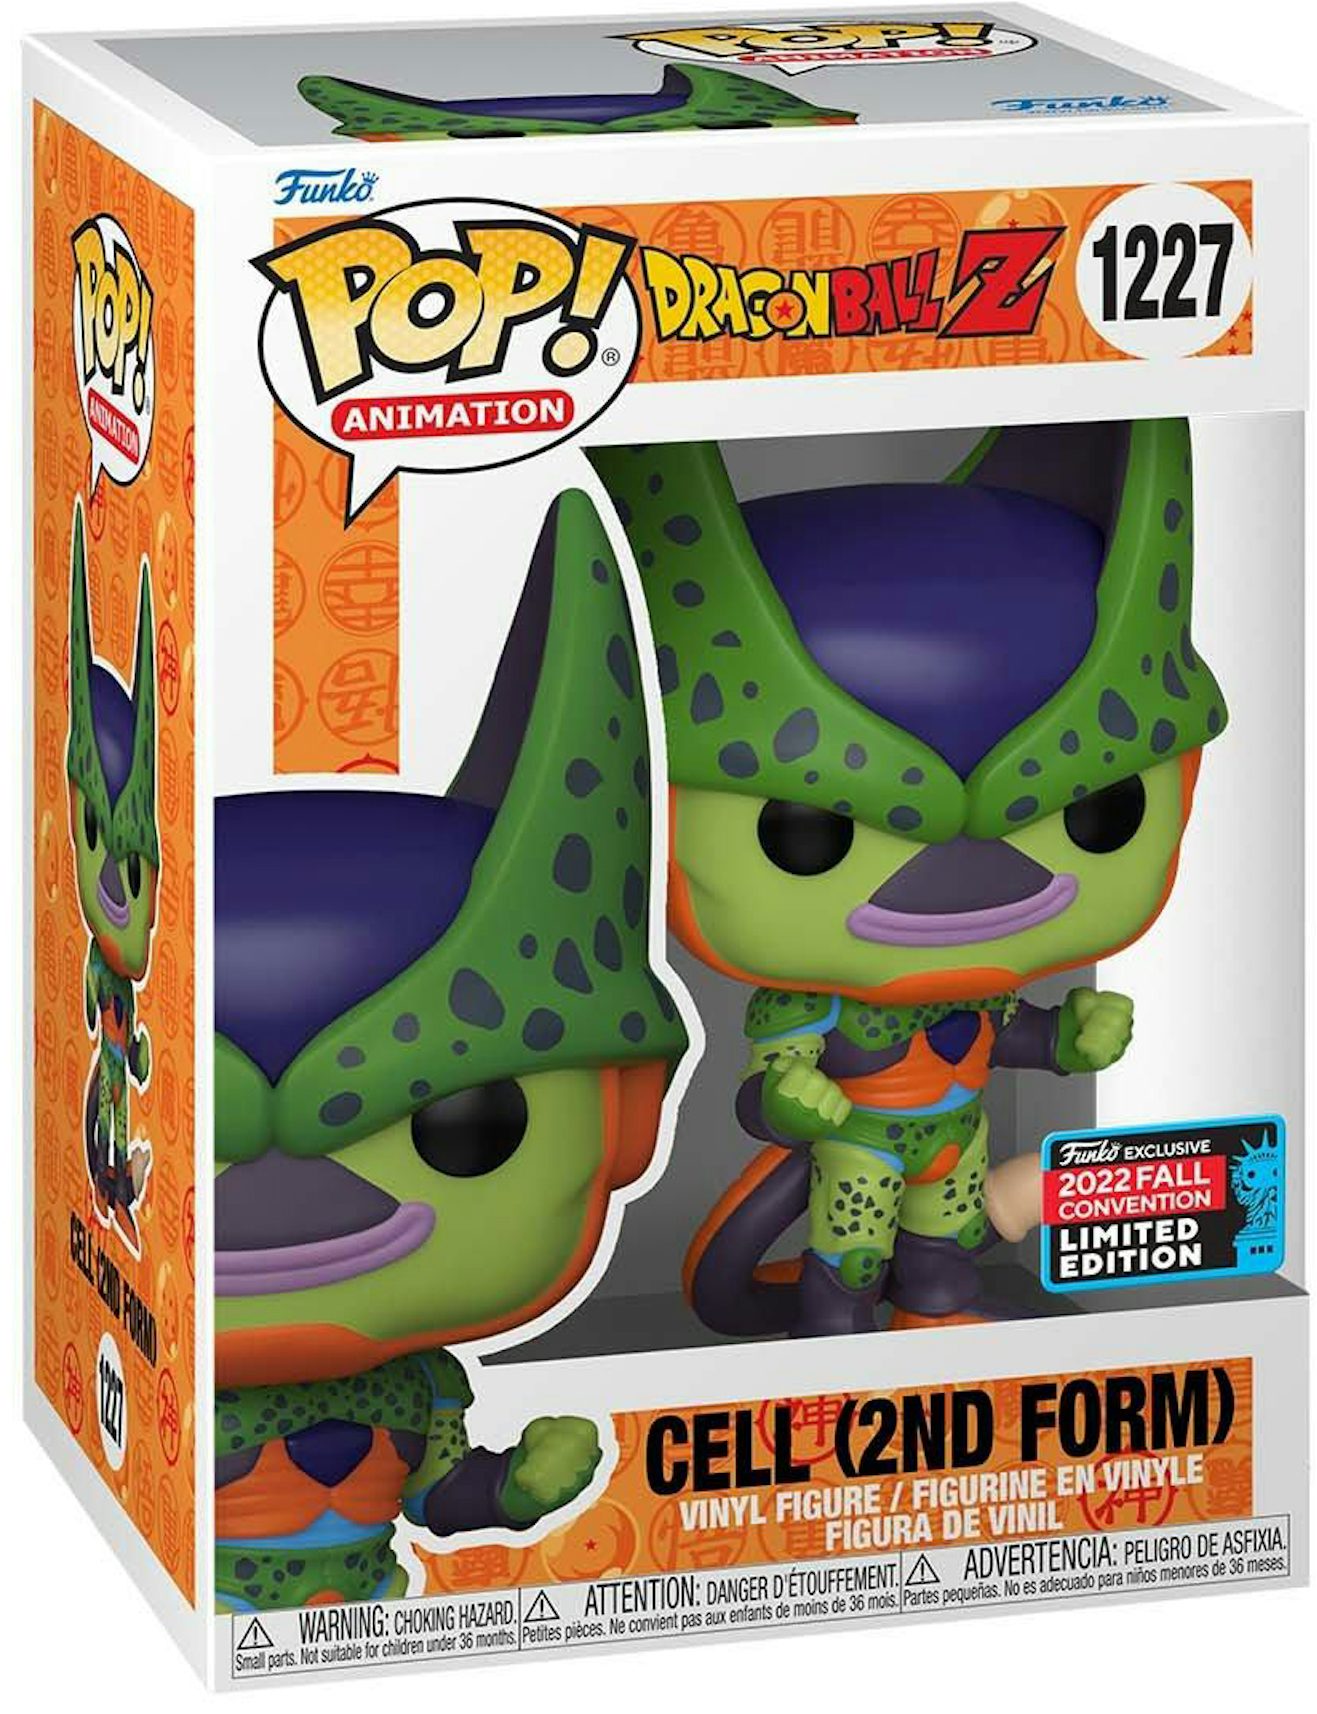 Funko Pop! Animation Dragon Ball Z Cell (2nd Form) 2022 Fall Convention  Exclusive Figure #1227 - US